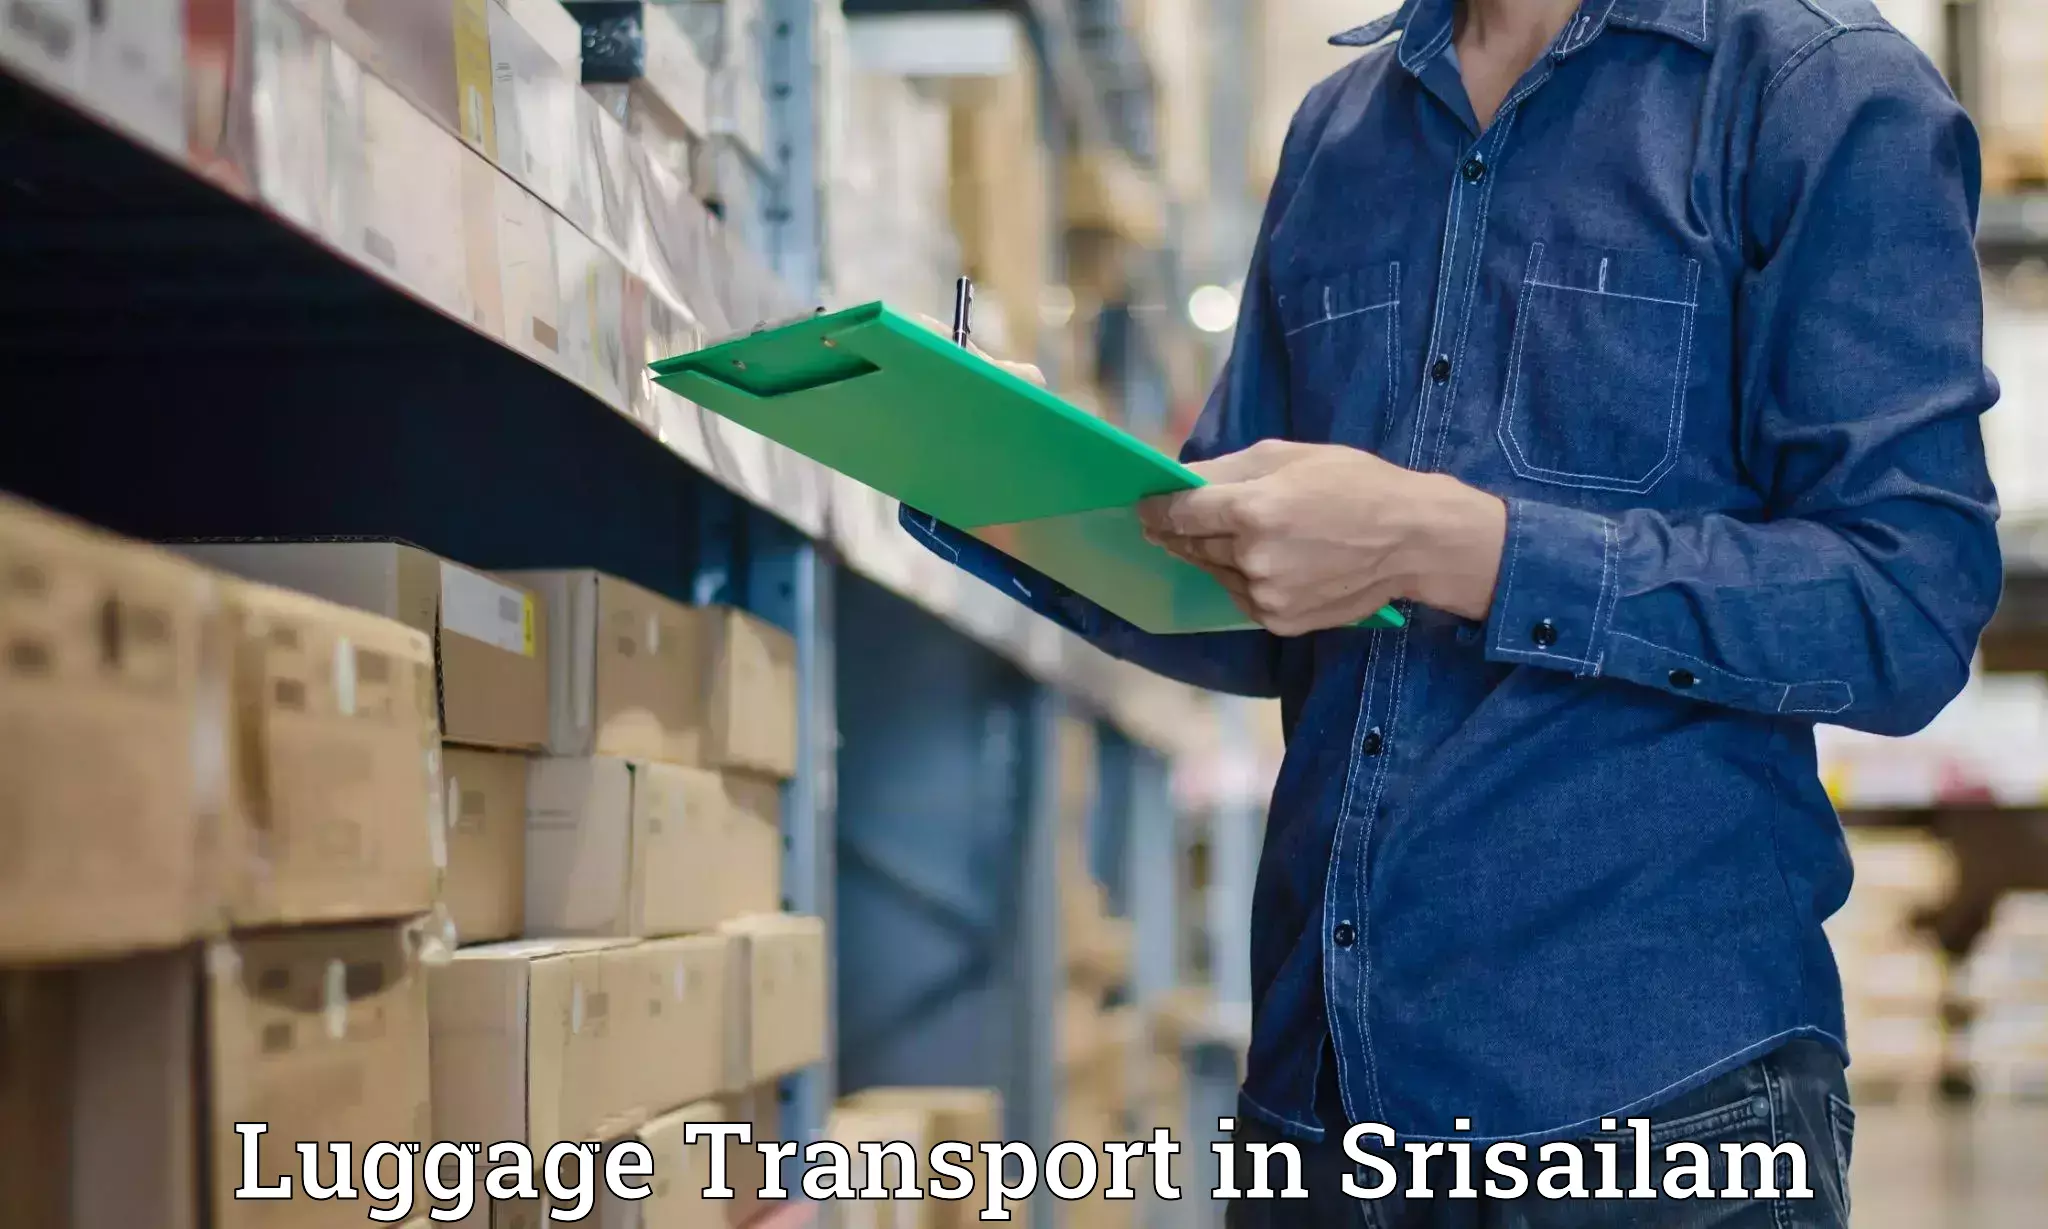 Luggage shipment specialists in Srisailam